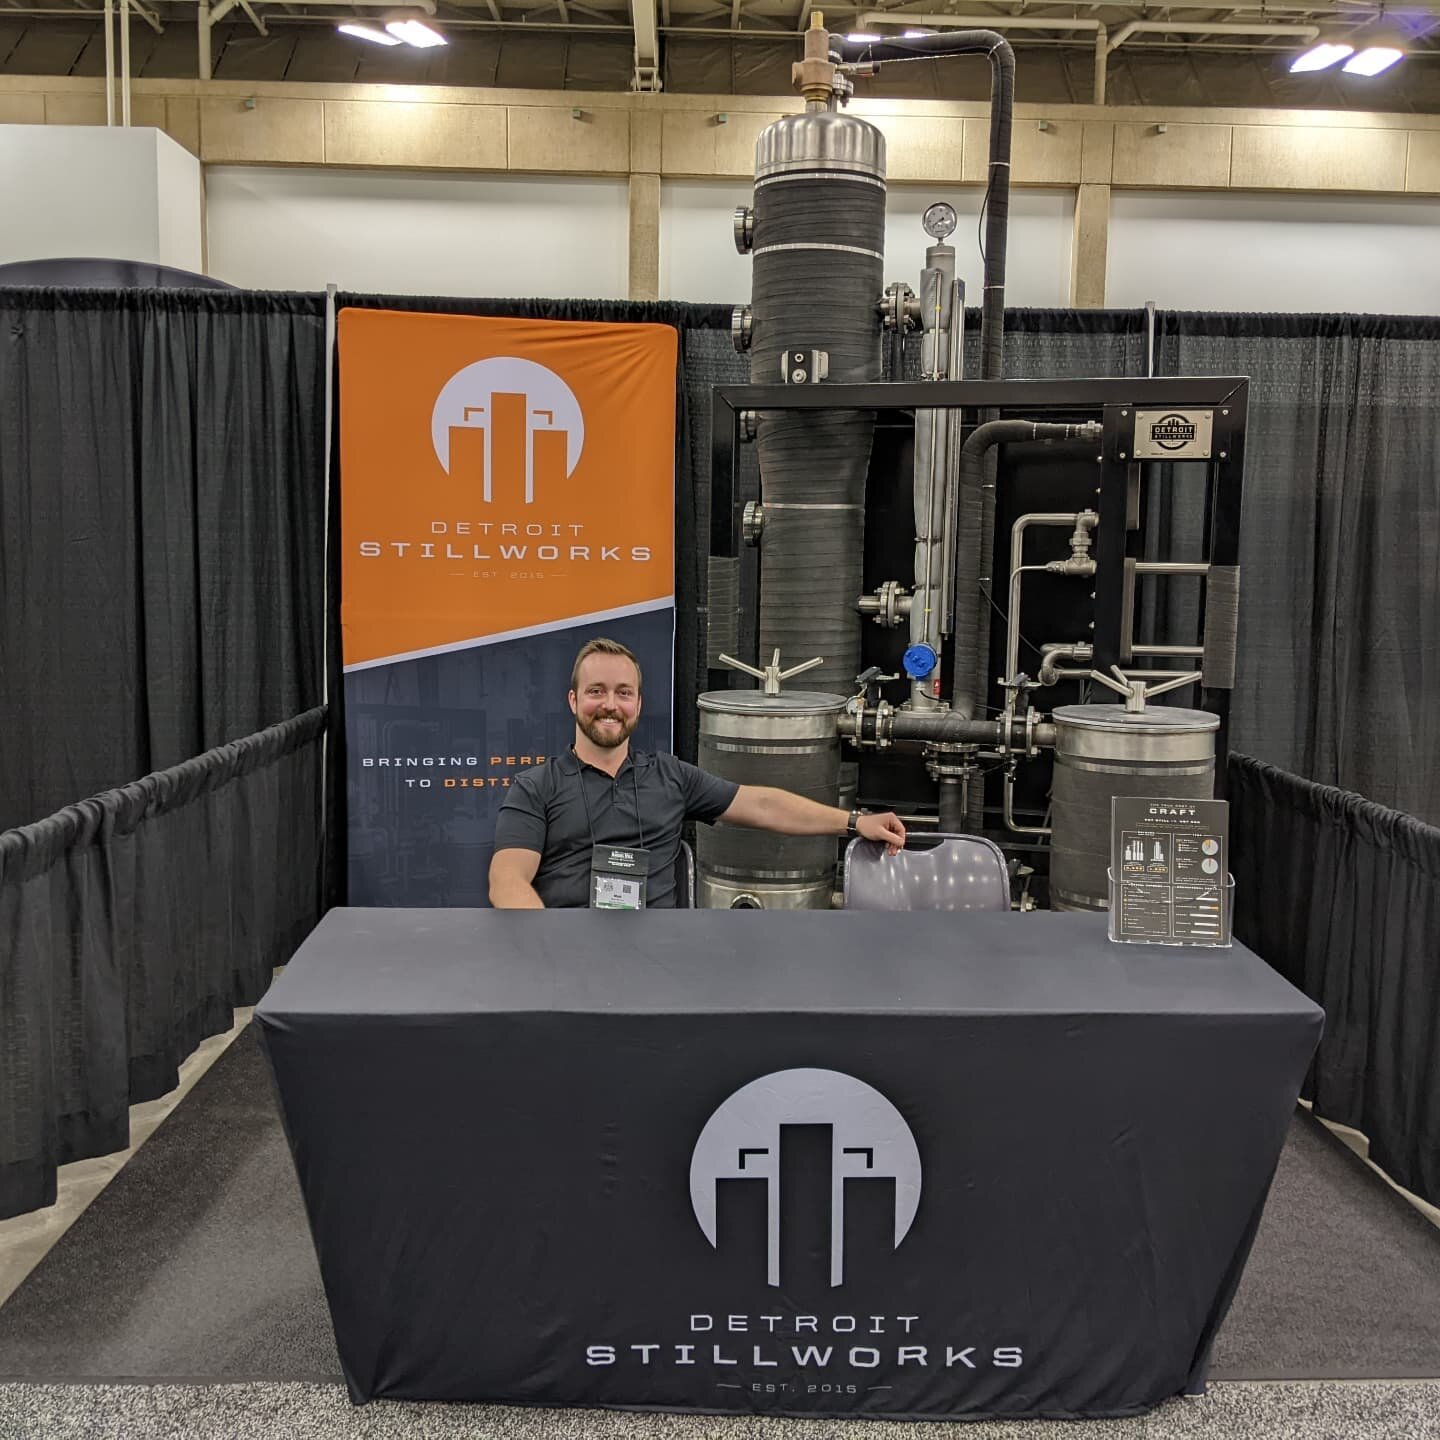 Come stop by our booth at the @craftspiritsus conference and say hello! We are here with our patented still - the Detroit Stillworks Hot Rod.